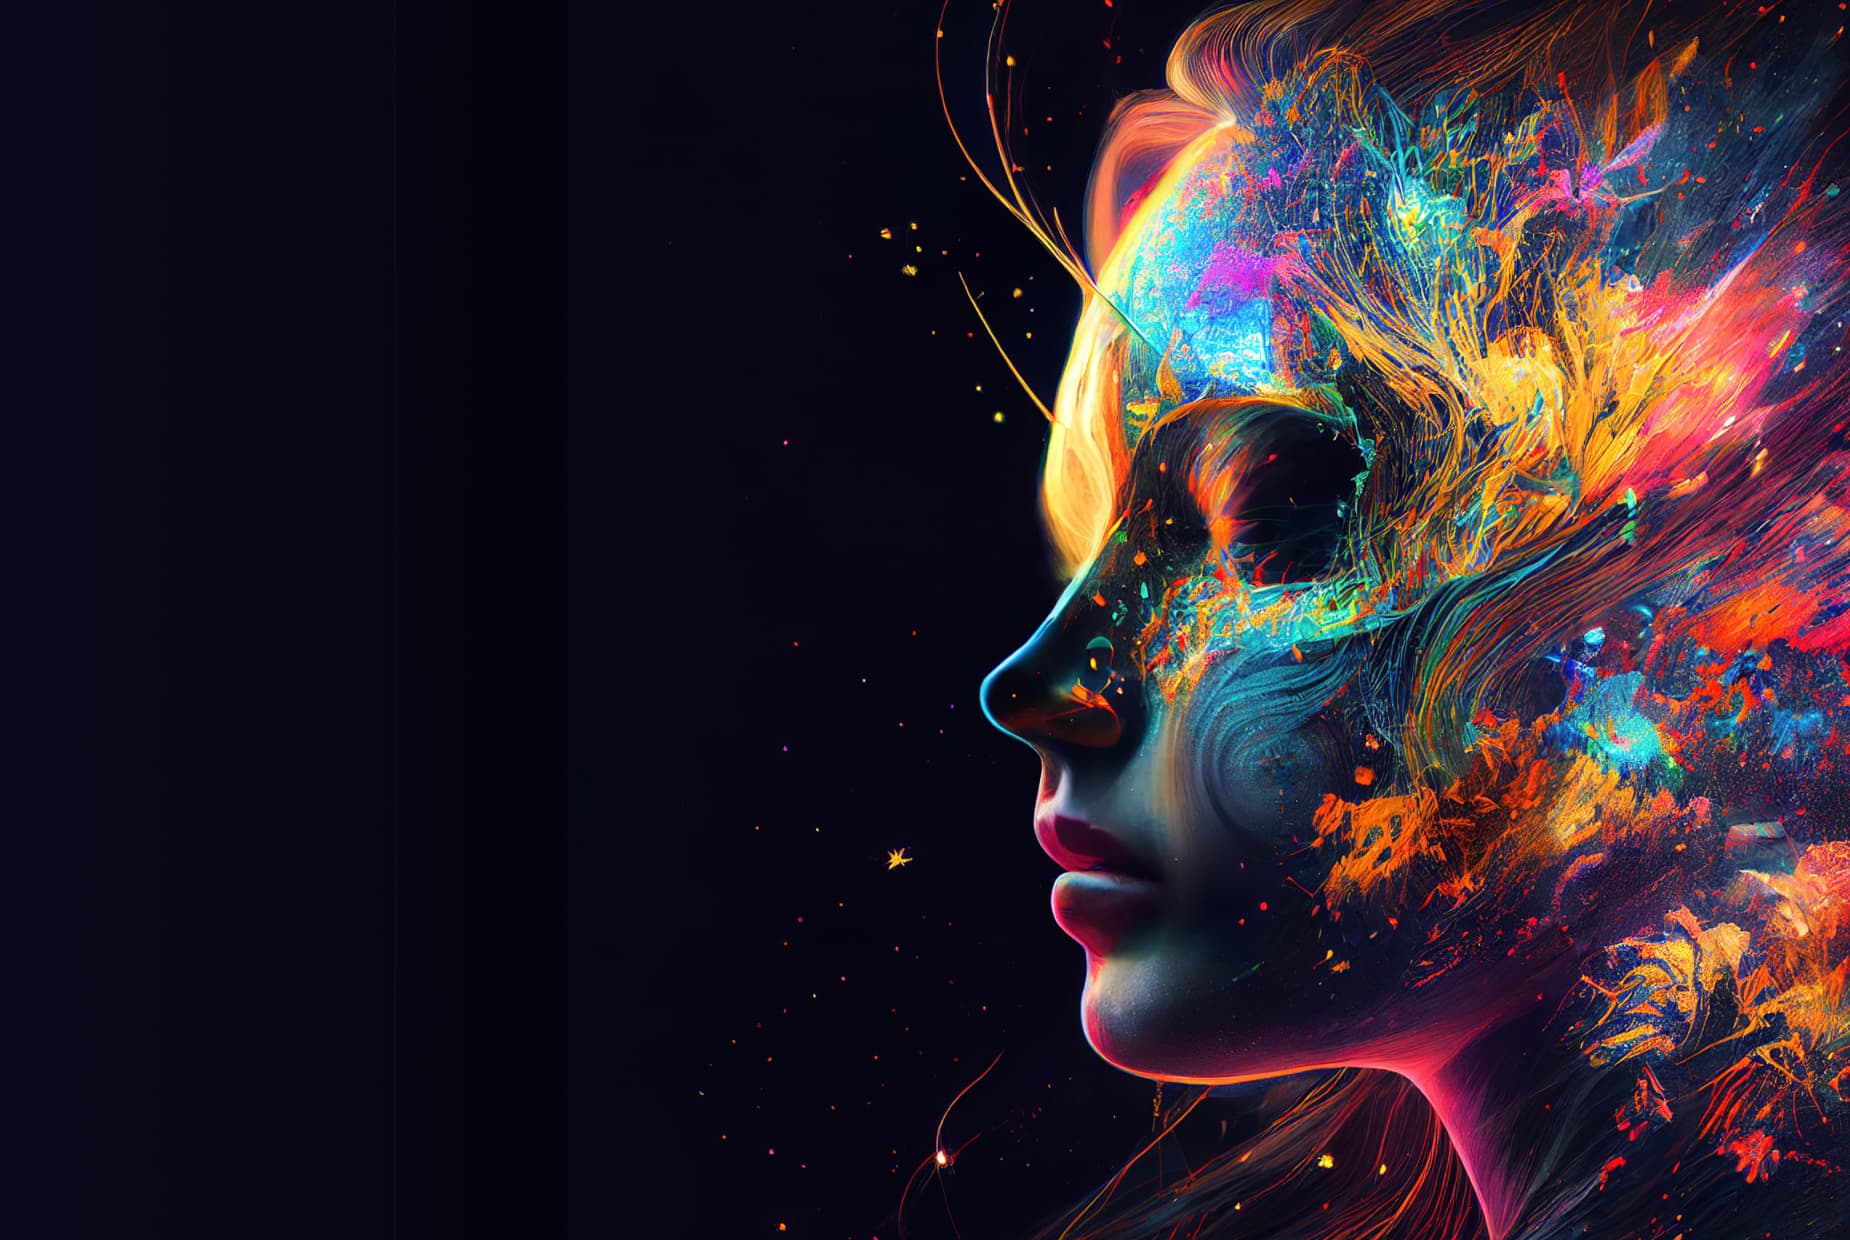 AI generated image of a woman’s head containing colorful abstract art.